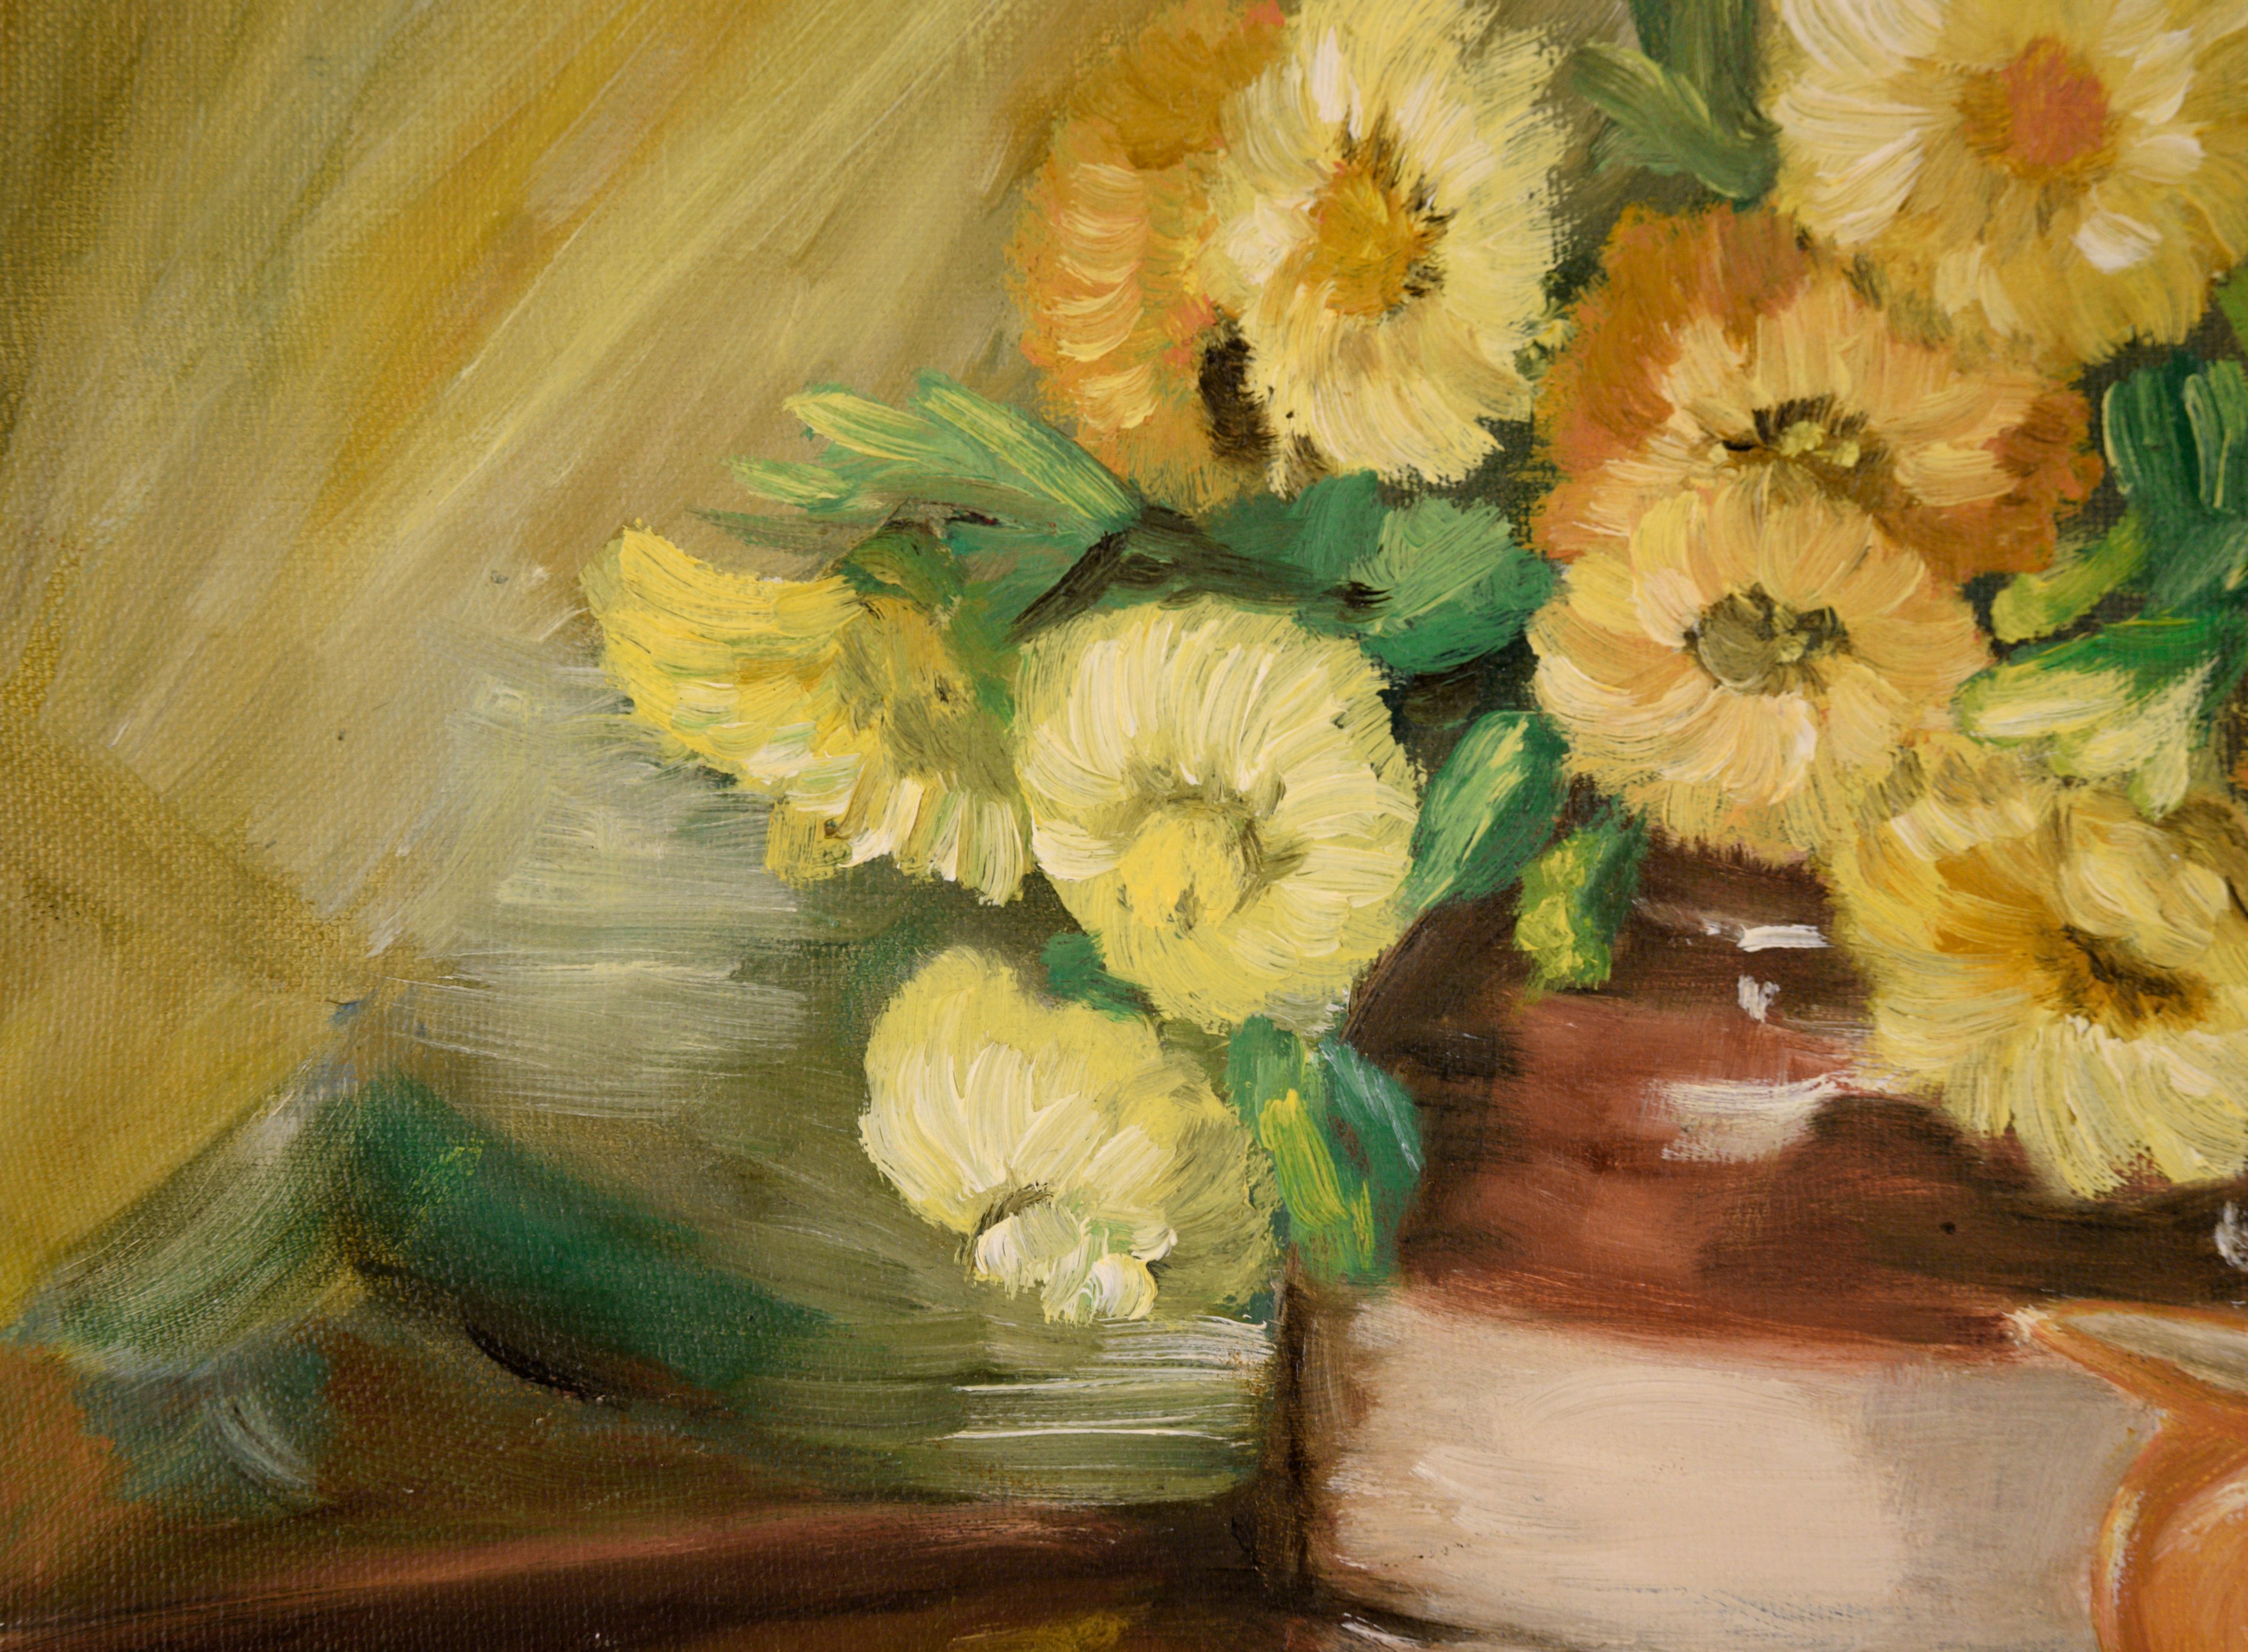 Calendula Still Life with Pitcher in Oil on Canvas

Vibrant still life with calendulas in a pot by unknown artist L. Hayes (American, 20th Century). Bright yellow and orange flowers sit in a two-tone pot. In front of the pot is a small orange